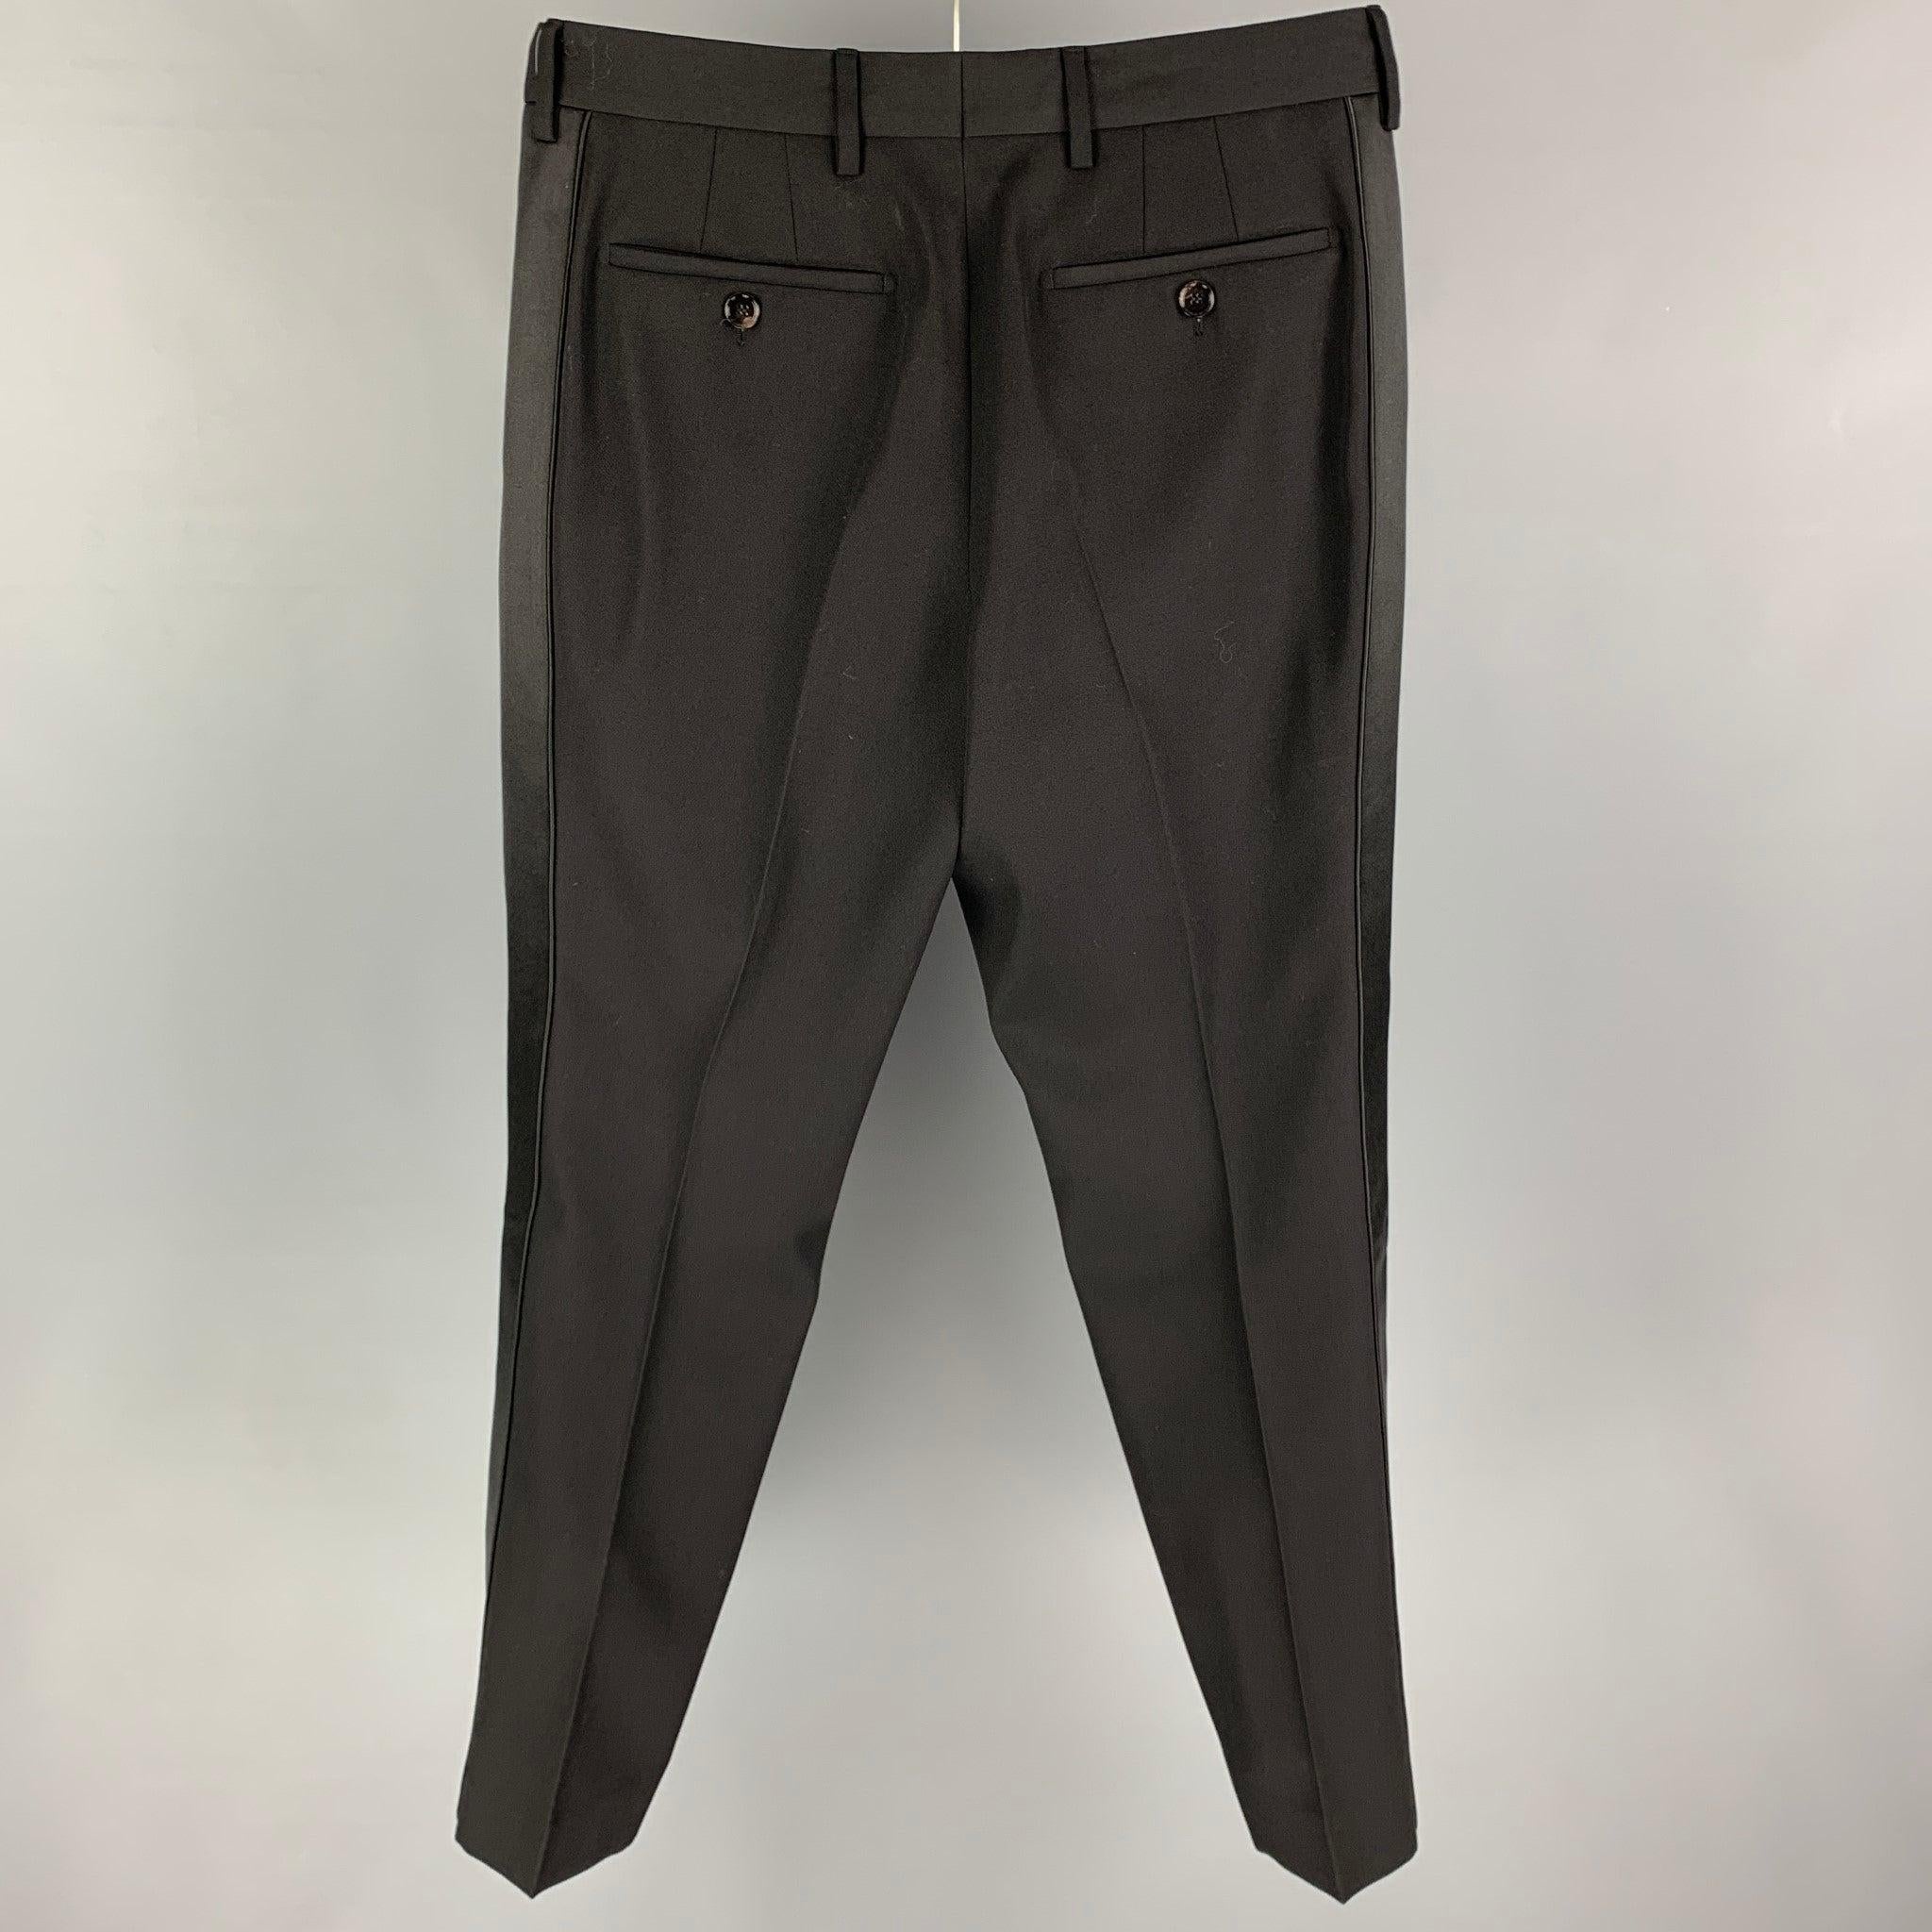 BURBERRY Size 32 Black Wool Tuxedo Dress Pants In Excellent Condition For Sale In San Francisco, CA